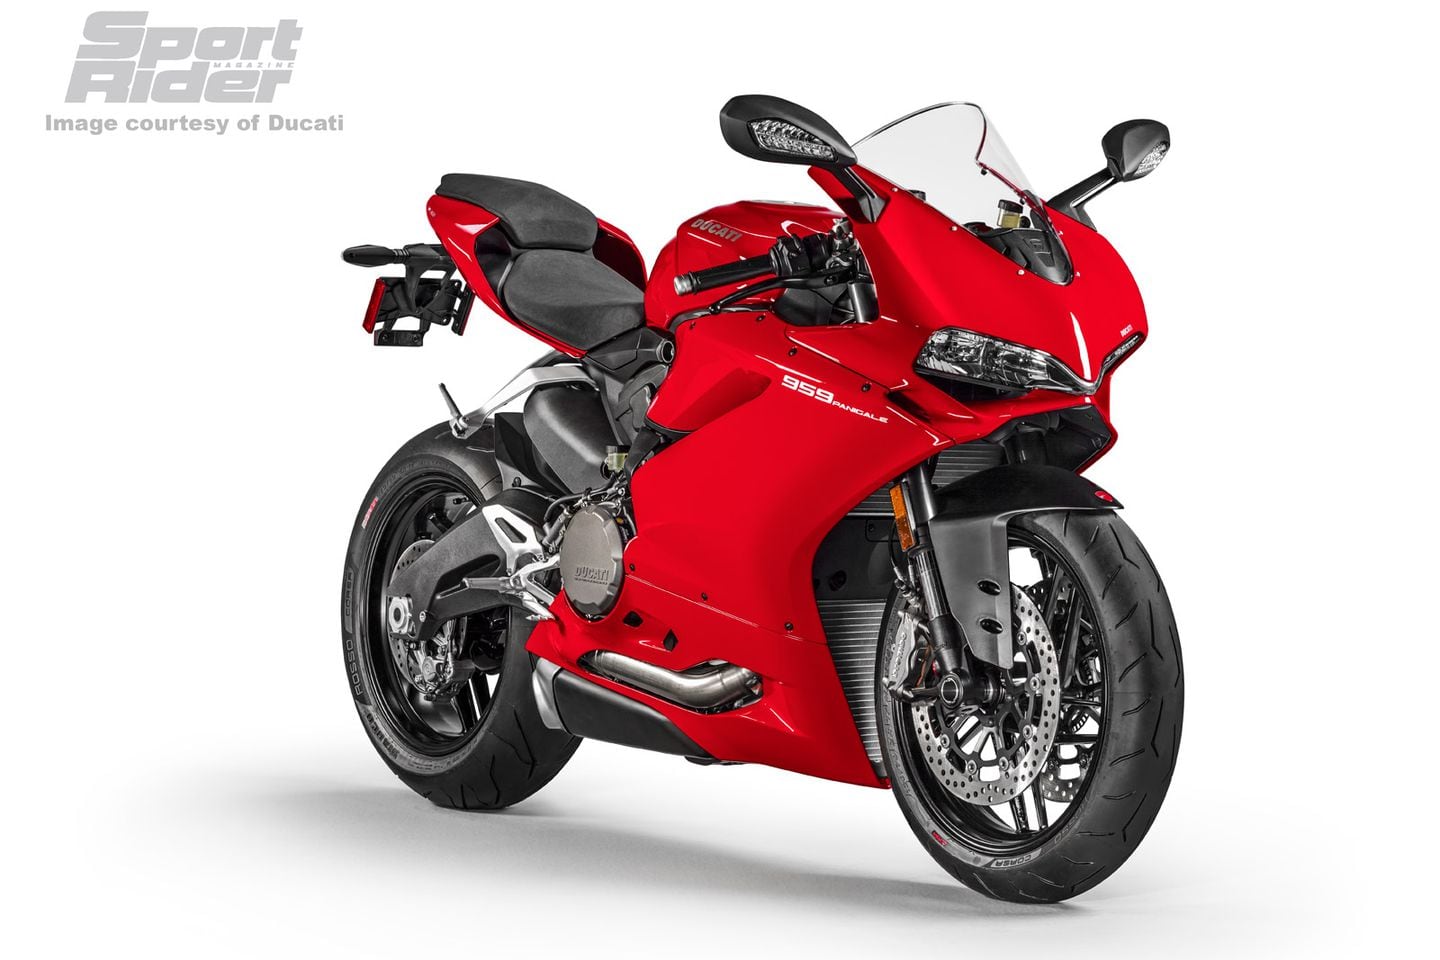 2016 Ducati 959 Panigale First Look | Cycle World